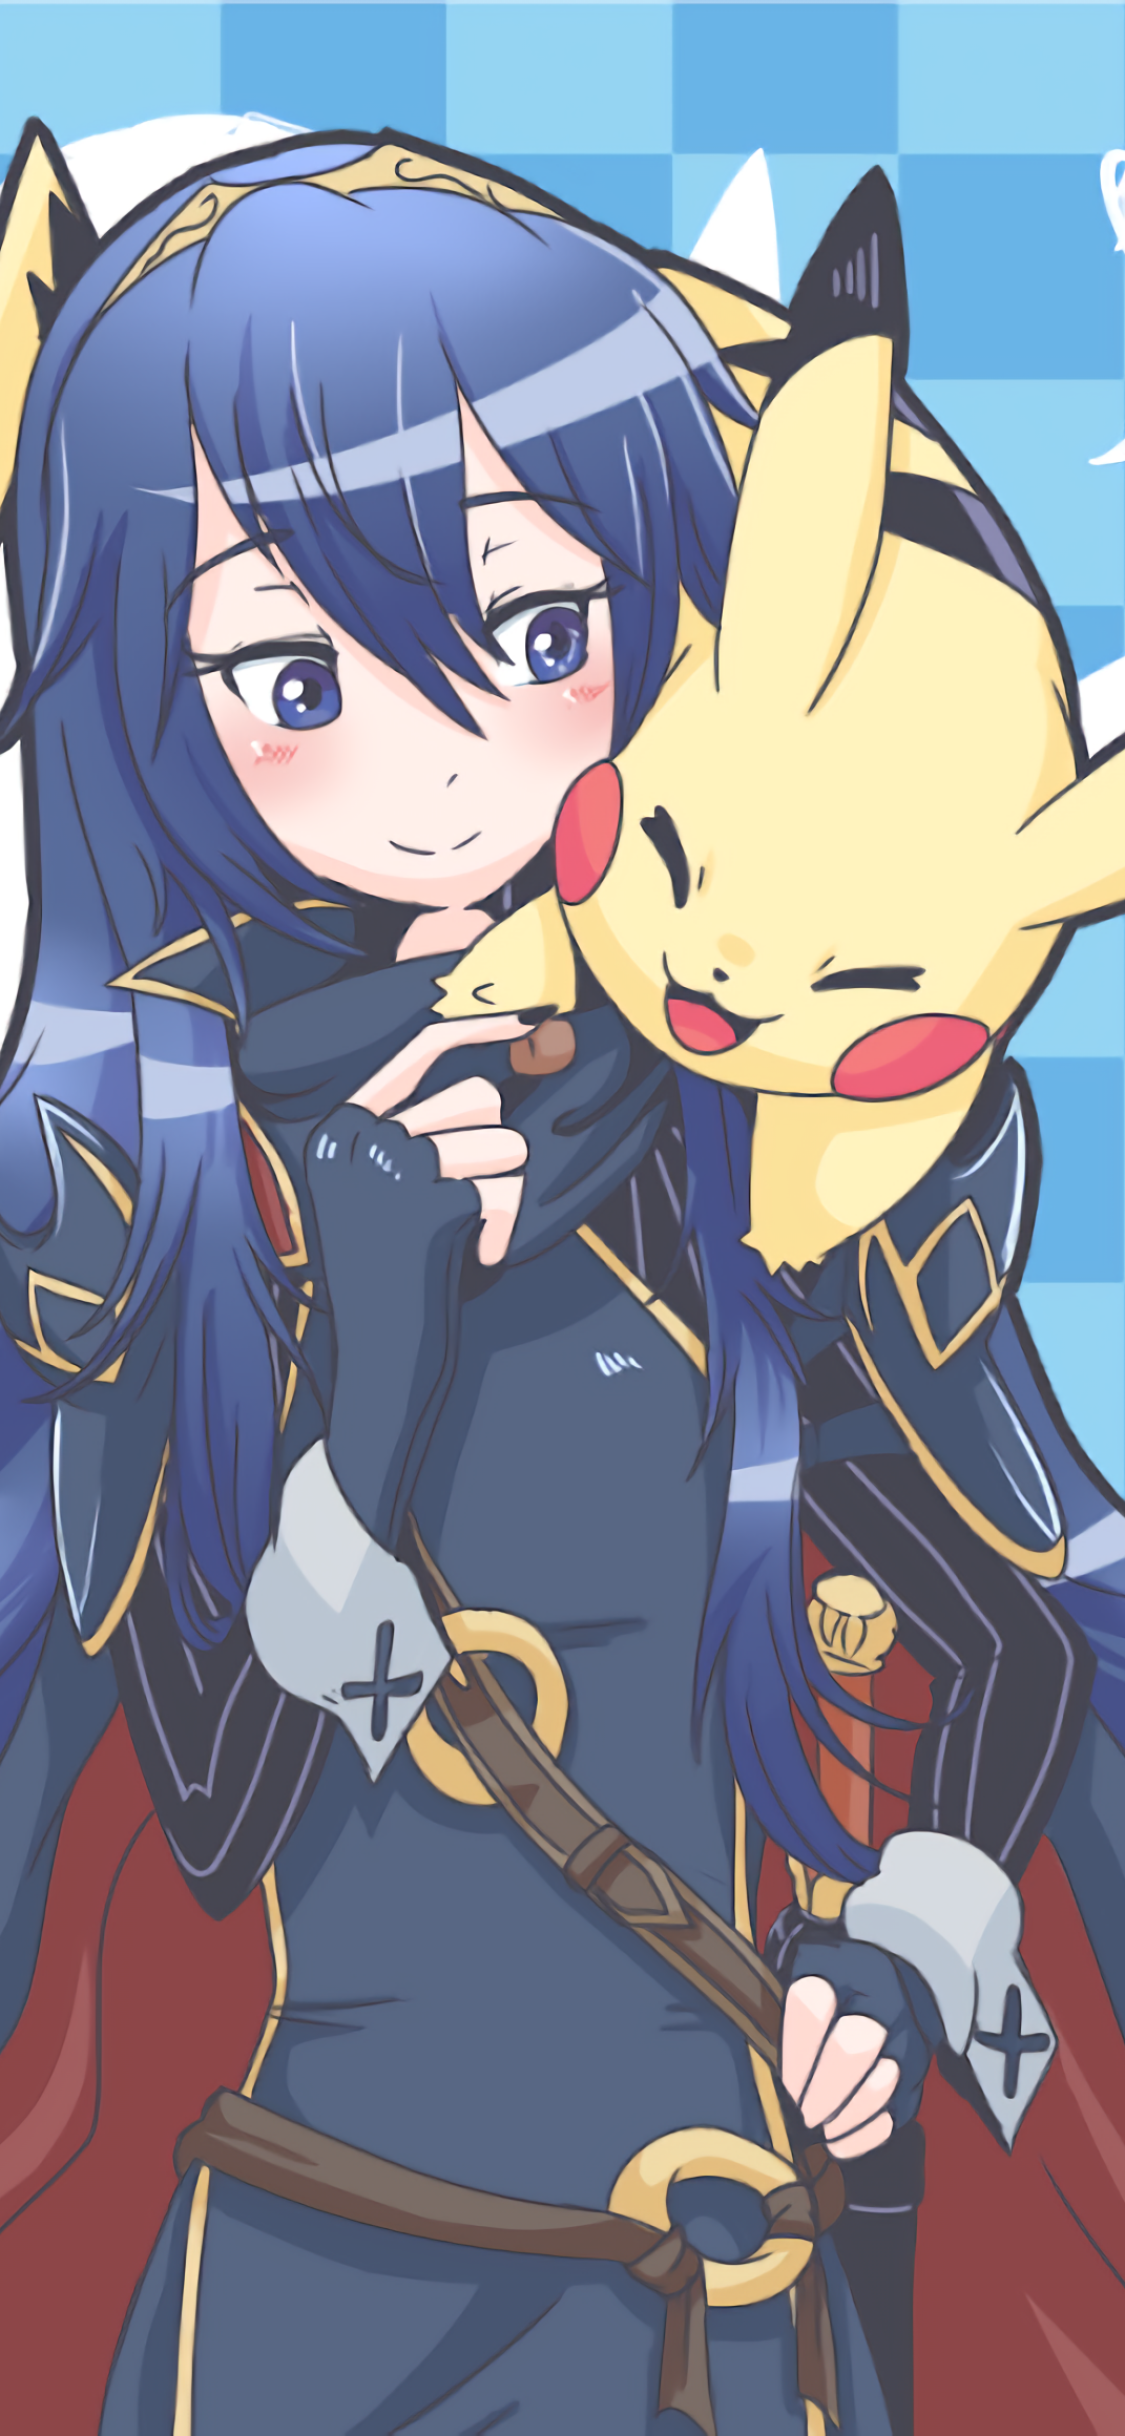 Lucina And Pikachu Anime / Crossover Mobile Wallpaper - Lucina And Pikachu , HD Wallpaper & Backgrounds